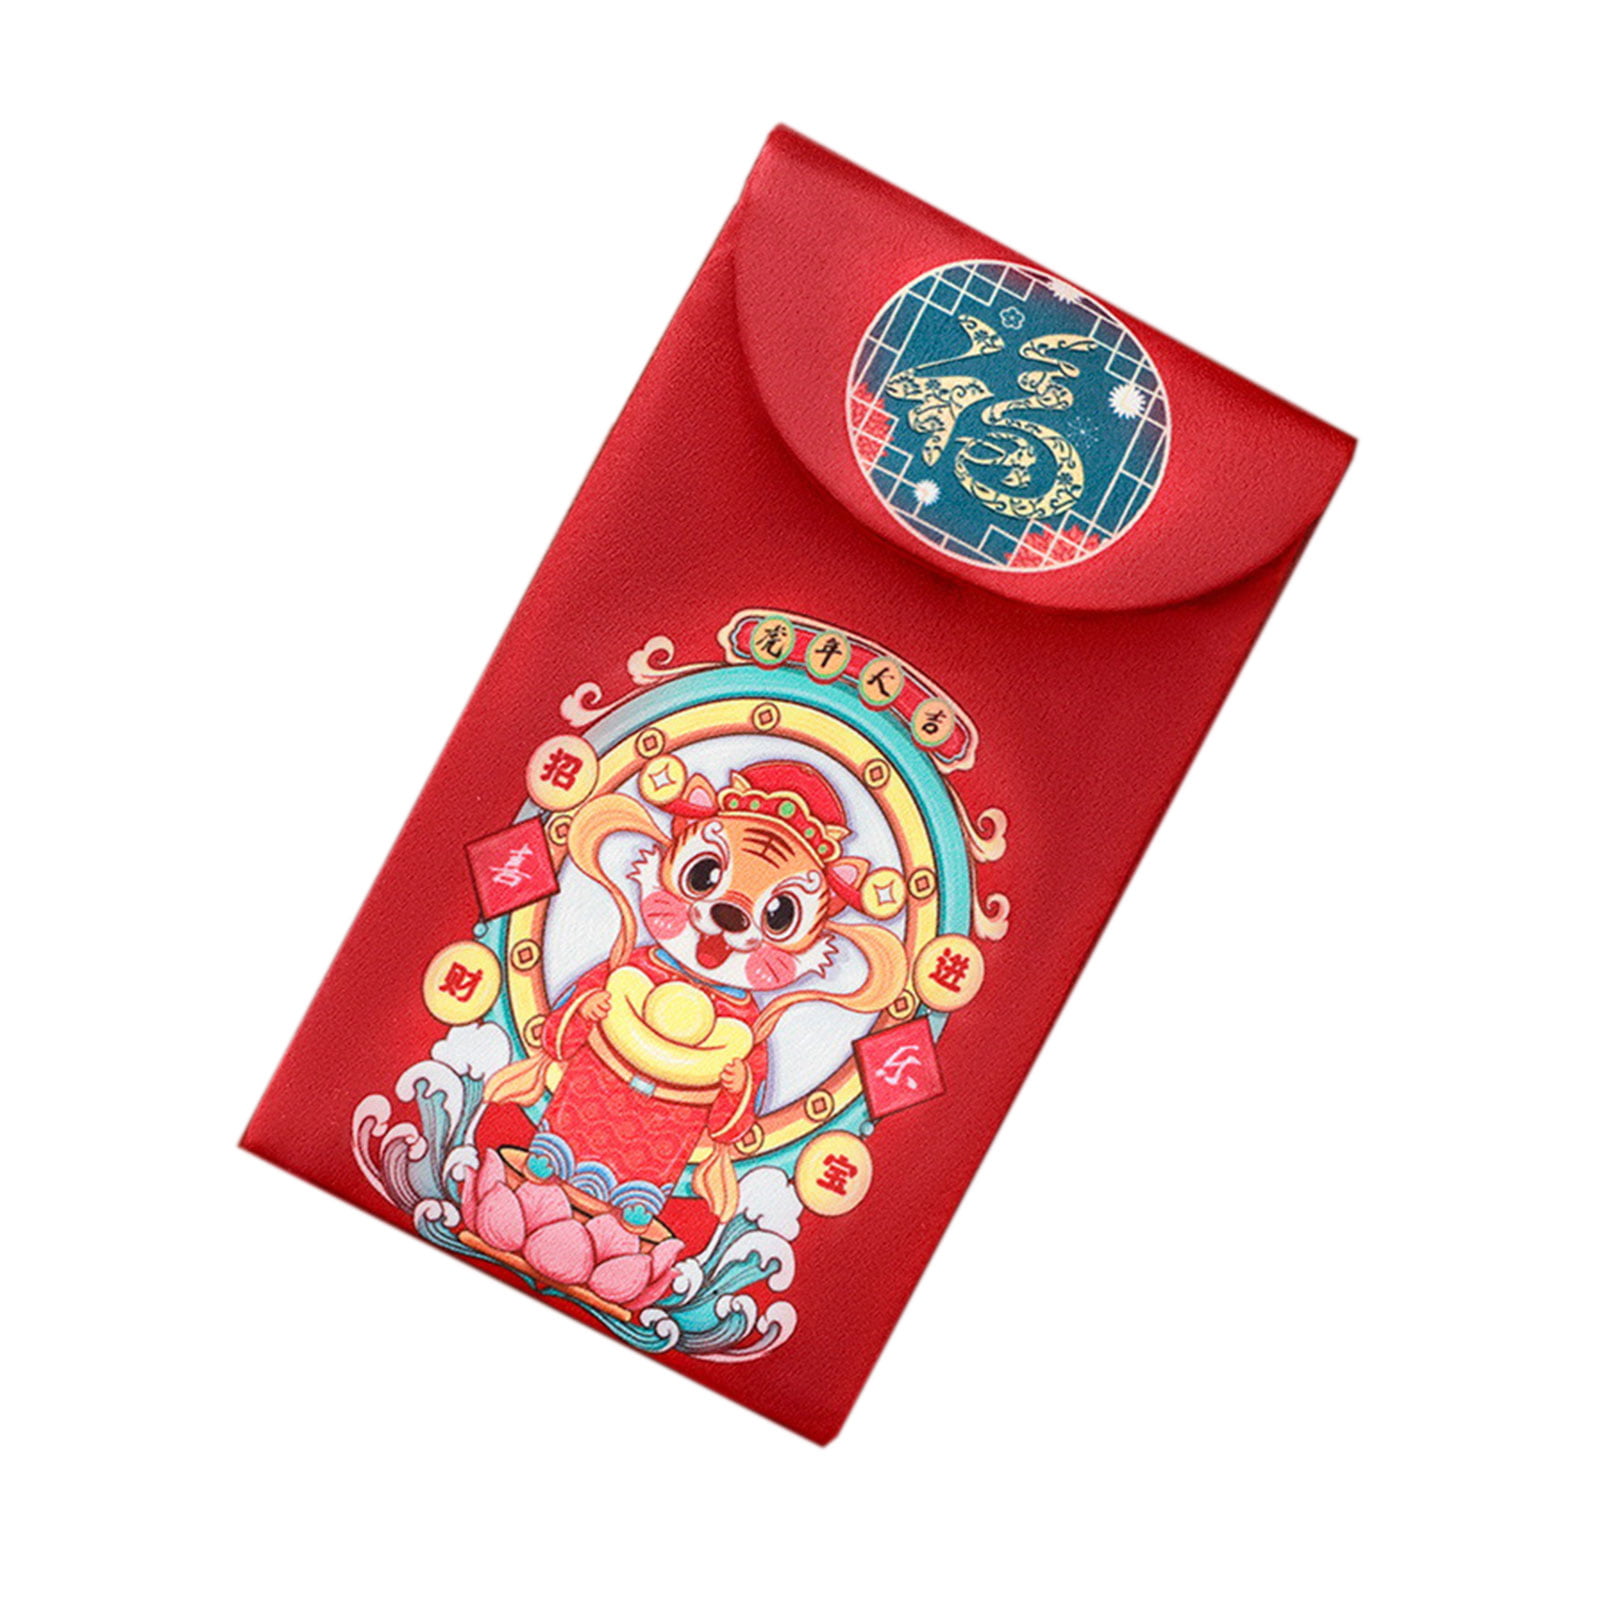 30-Count Chinese Red Packets 3 Cute Gold Foil Year of the Tiger Illustrations Gift Money Envelopes Hong Bao with Gold Foil Design Chinese New Year Red Envelopes 